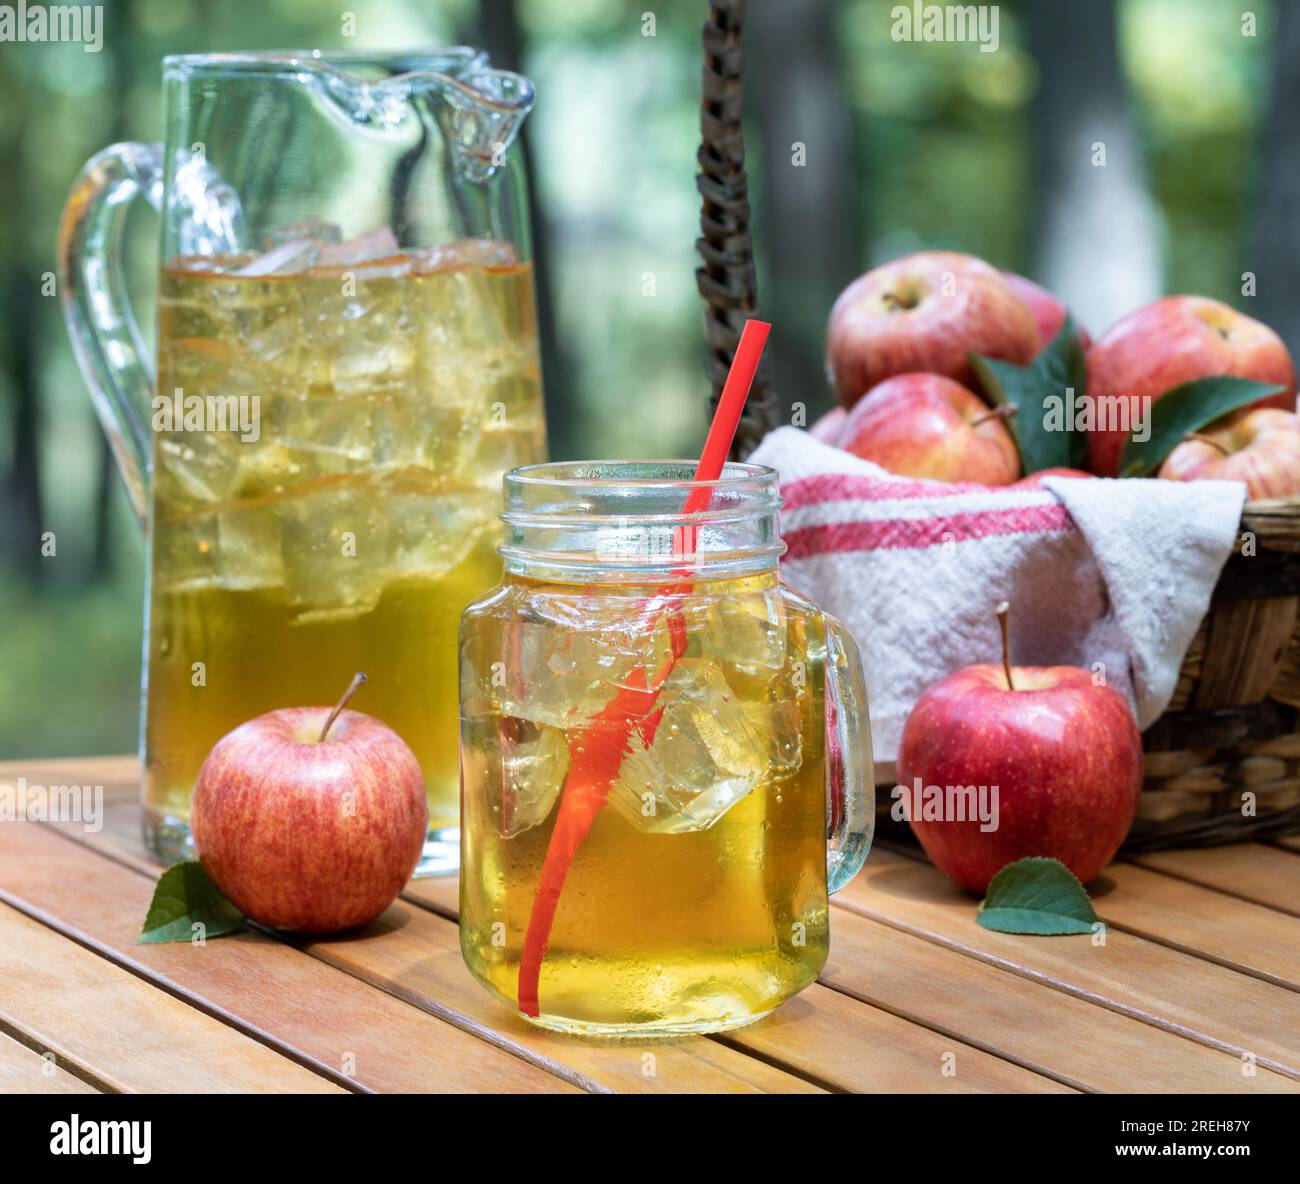 Apple juice in glass jar and pitcher with fressh red apples outdoors on wooden patio table and nature background Stock Photo